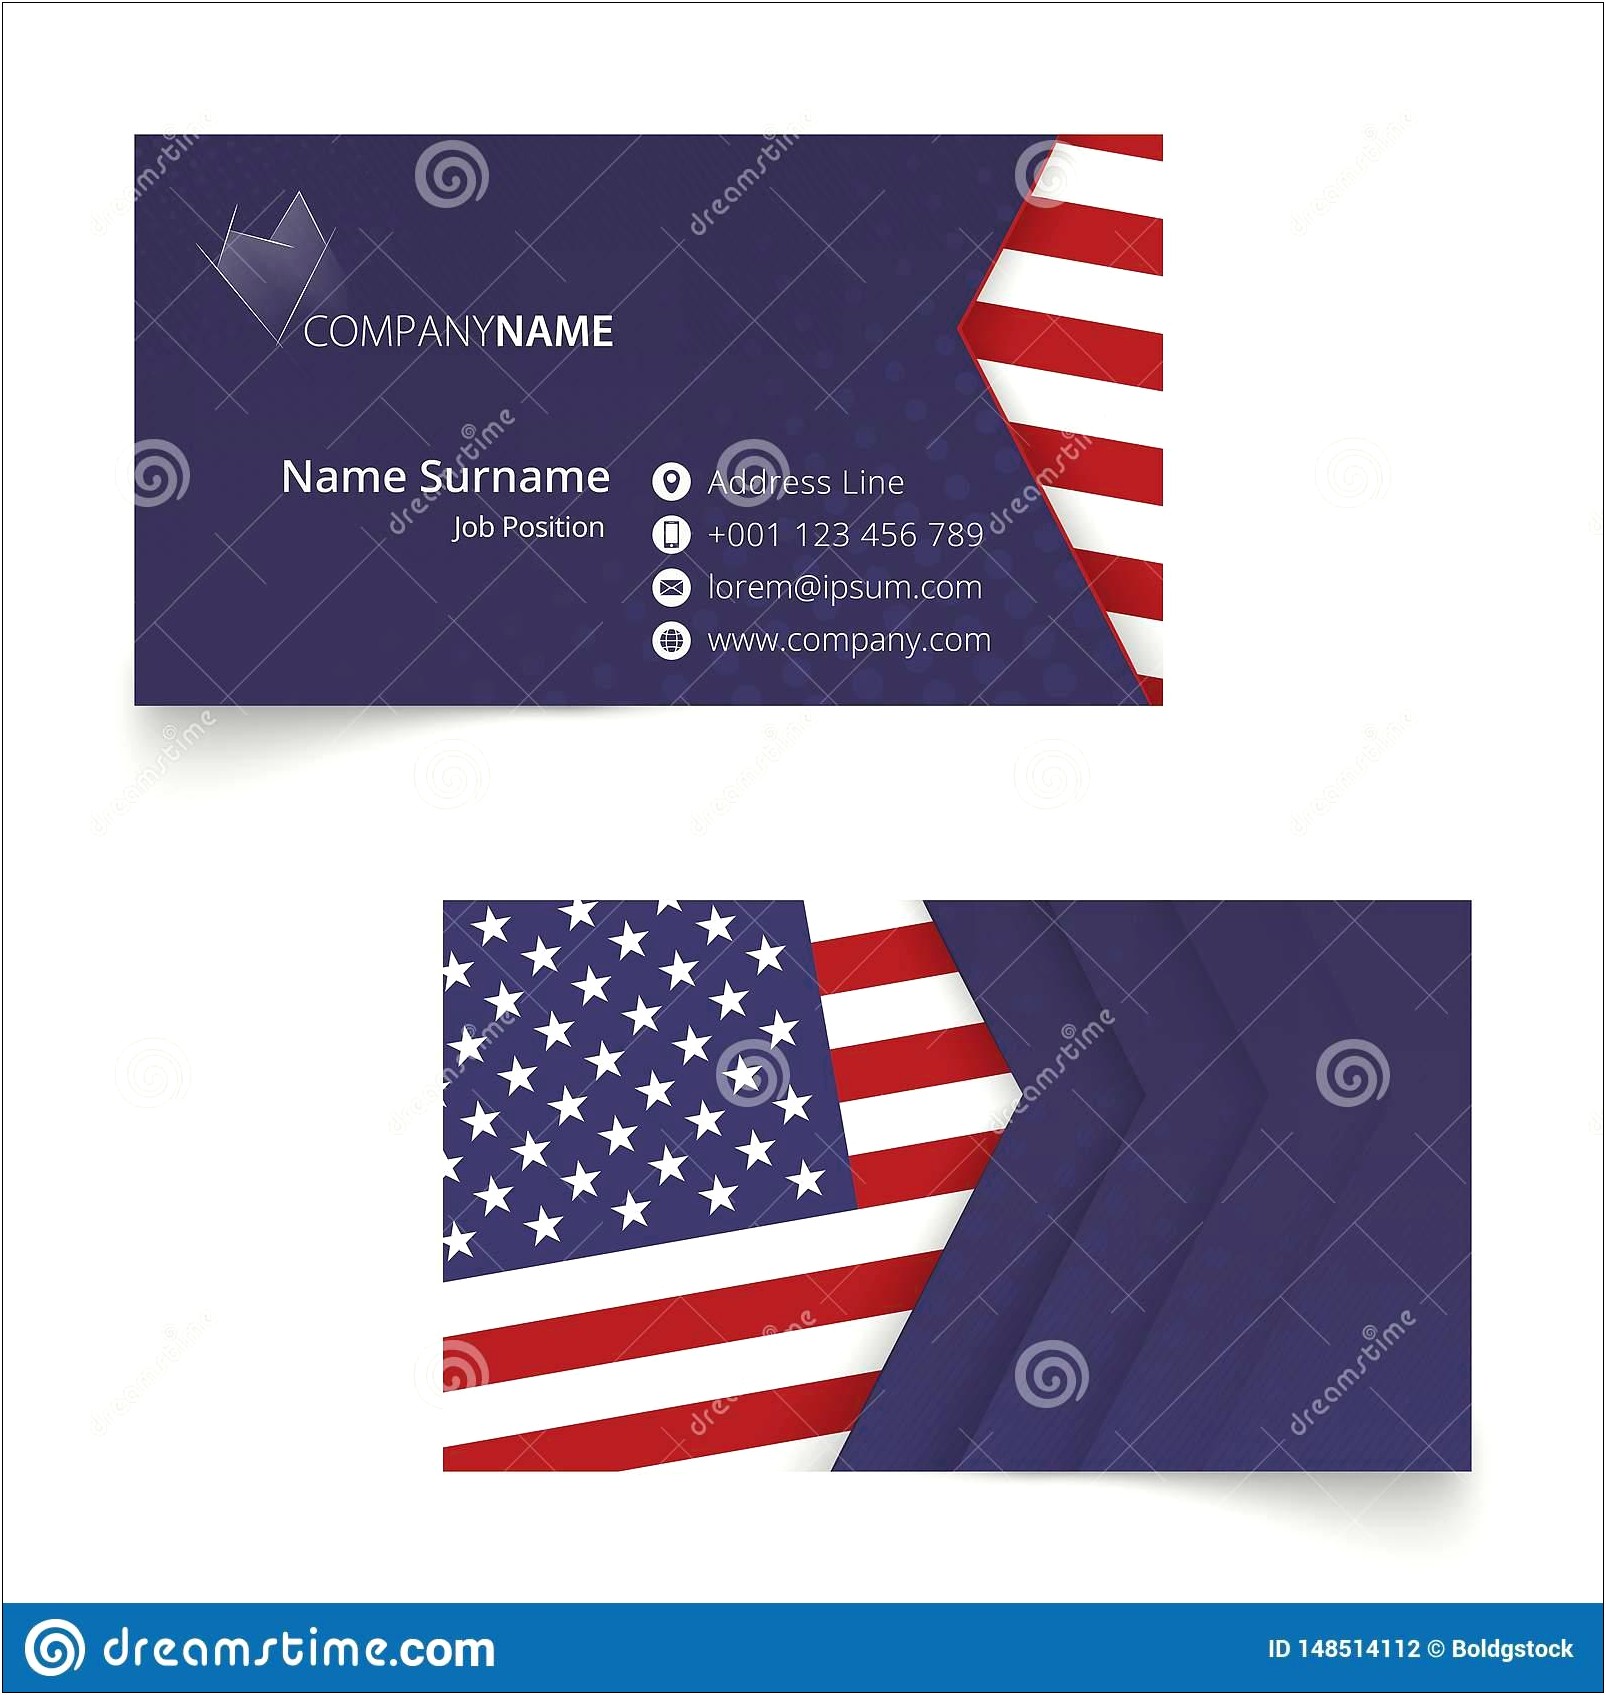 Free Business Card Template With American Flag